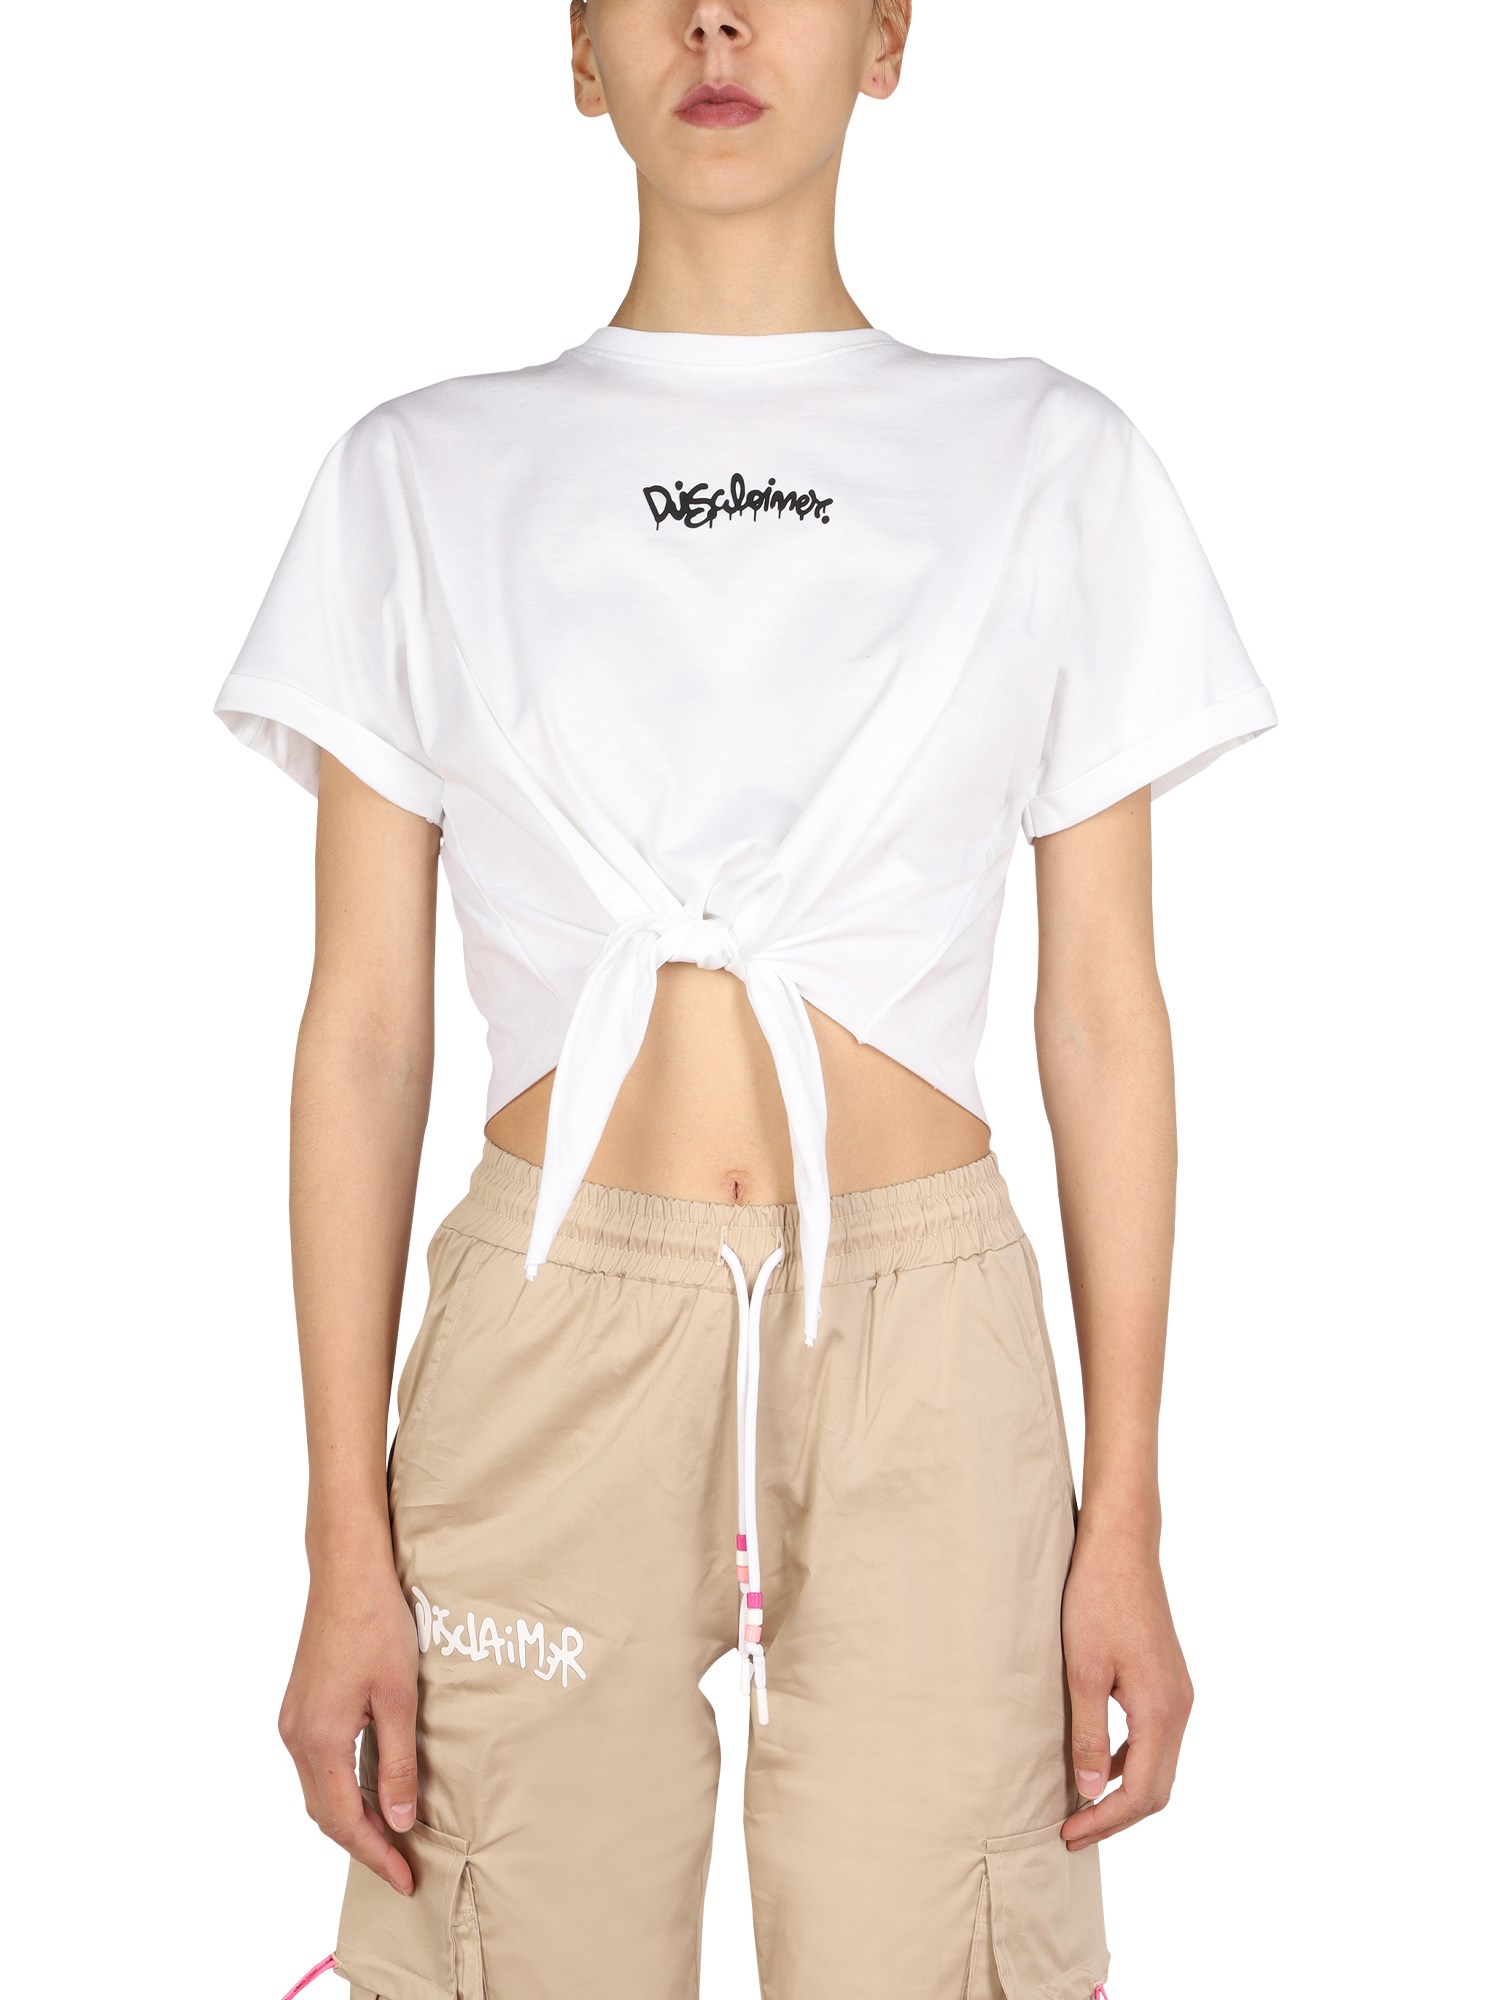 DISCLAIMER CROPPED T-SHIRT